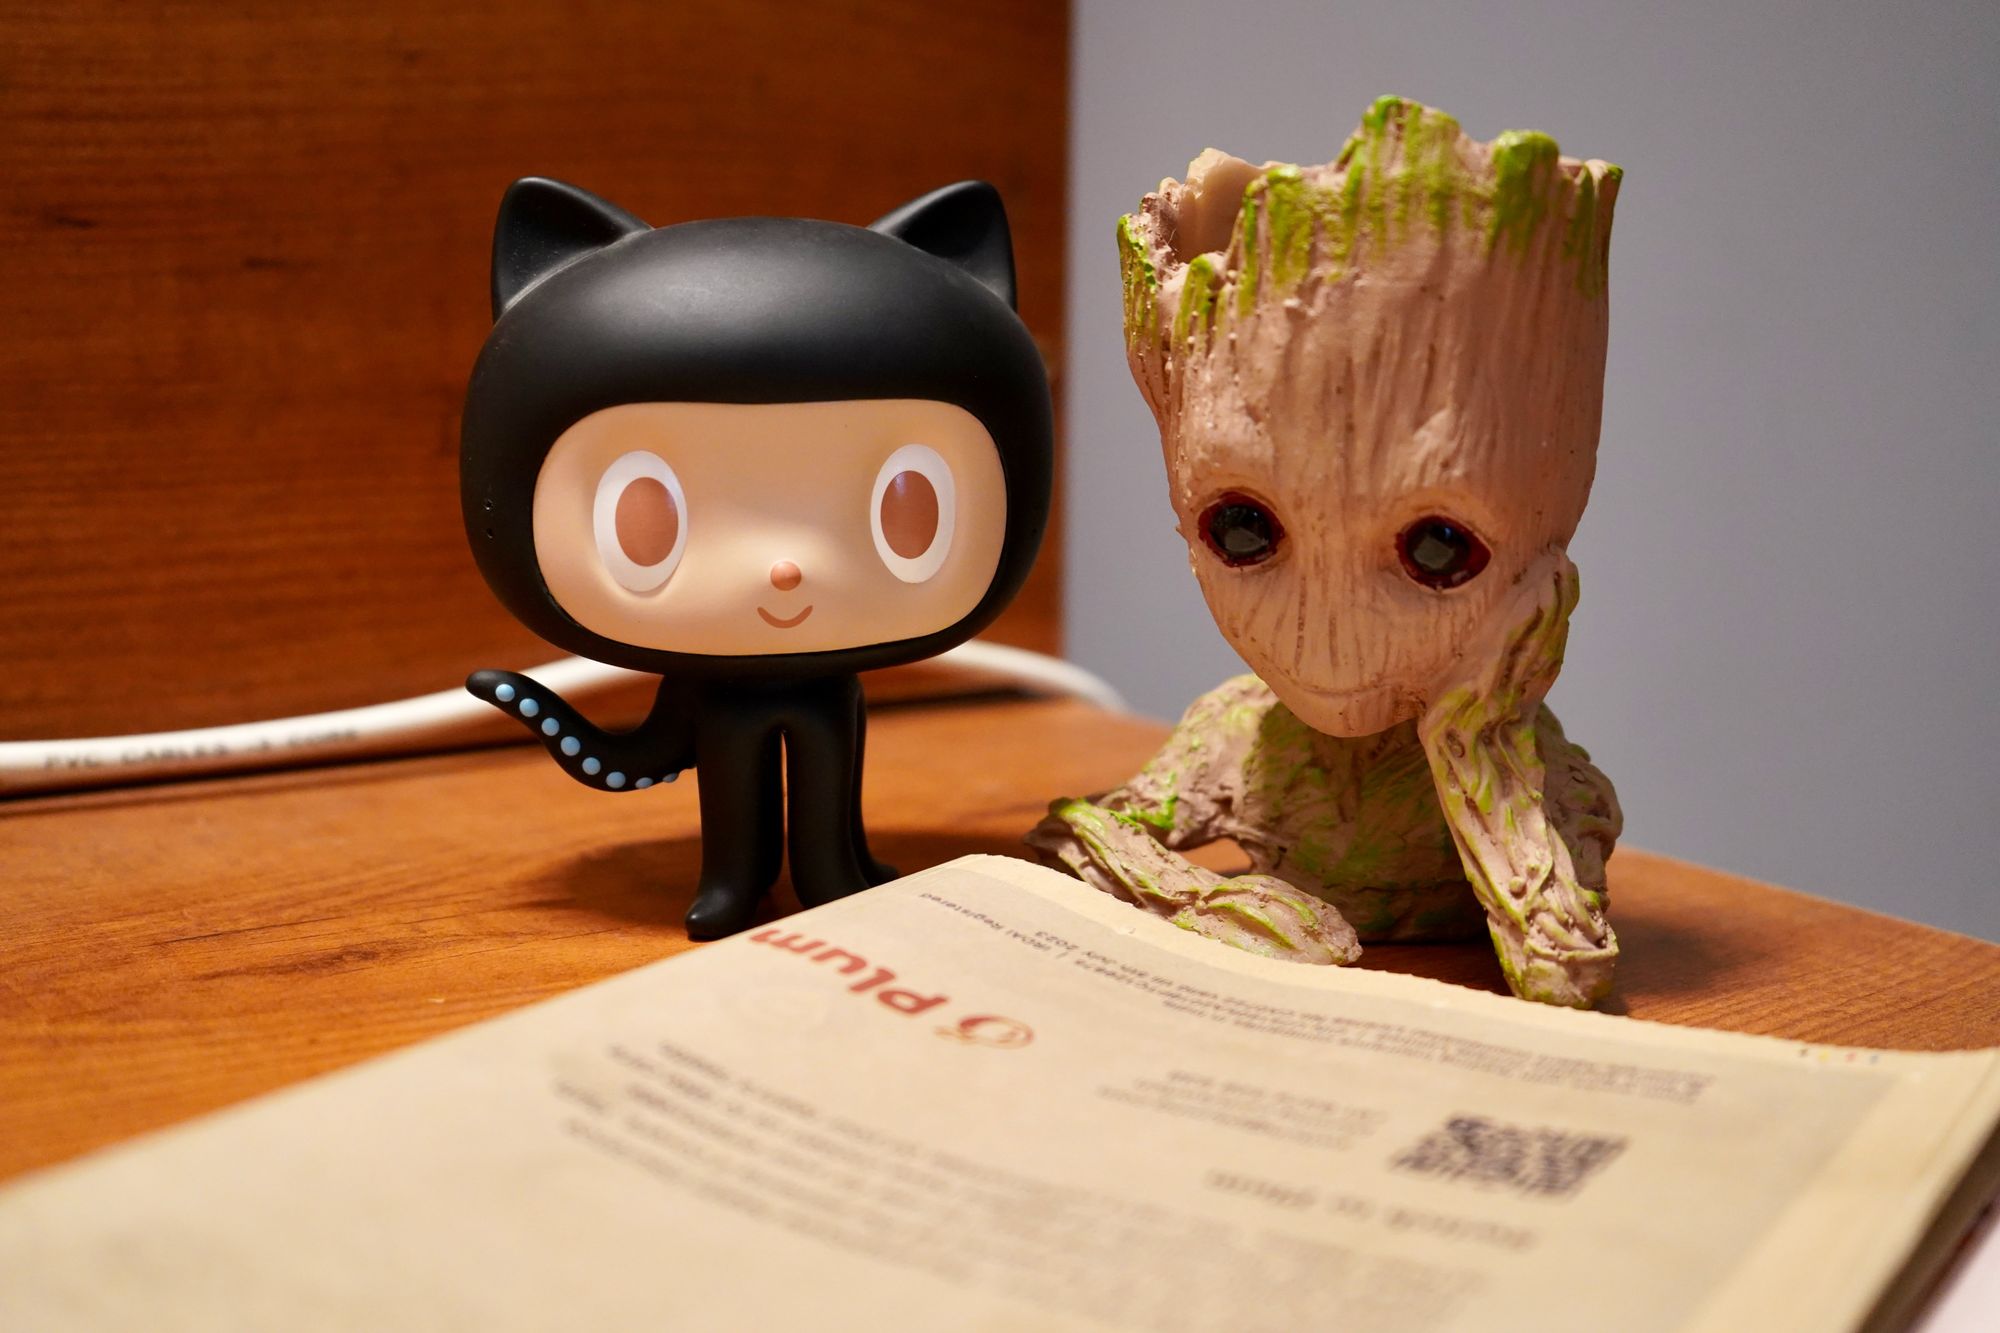 Octocat and a baby Groot looking over a newspaper.